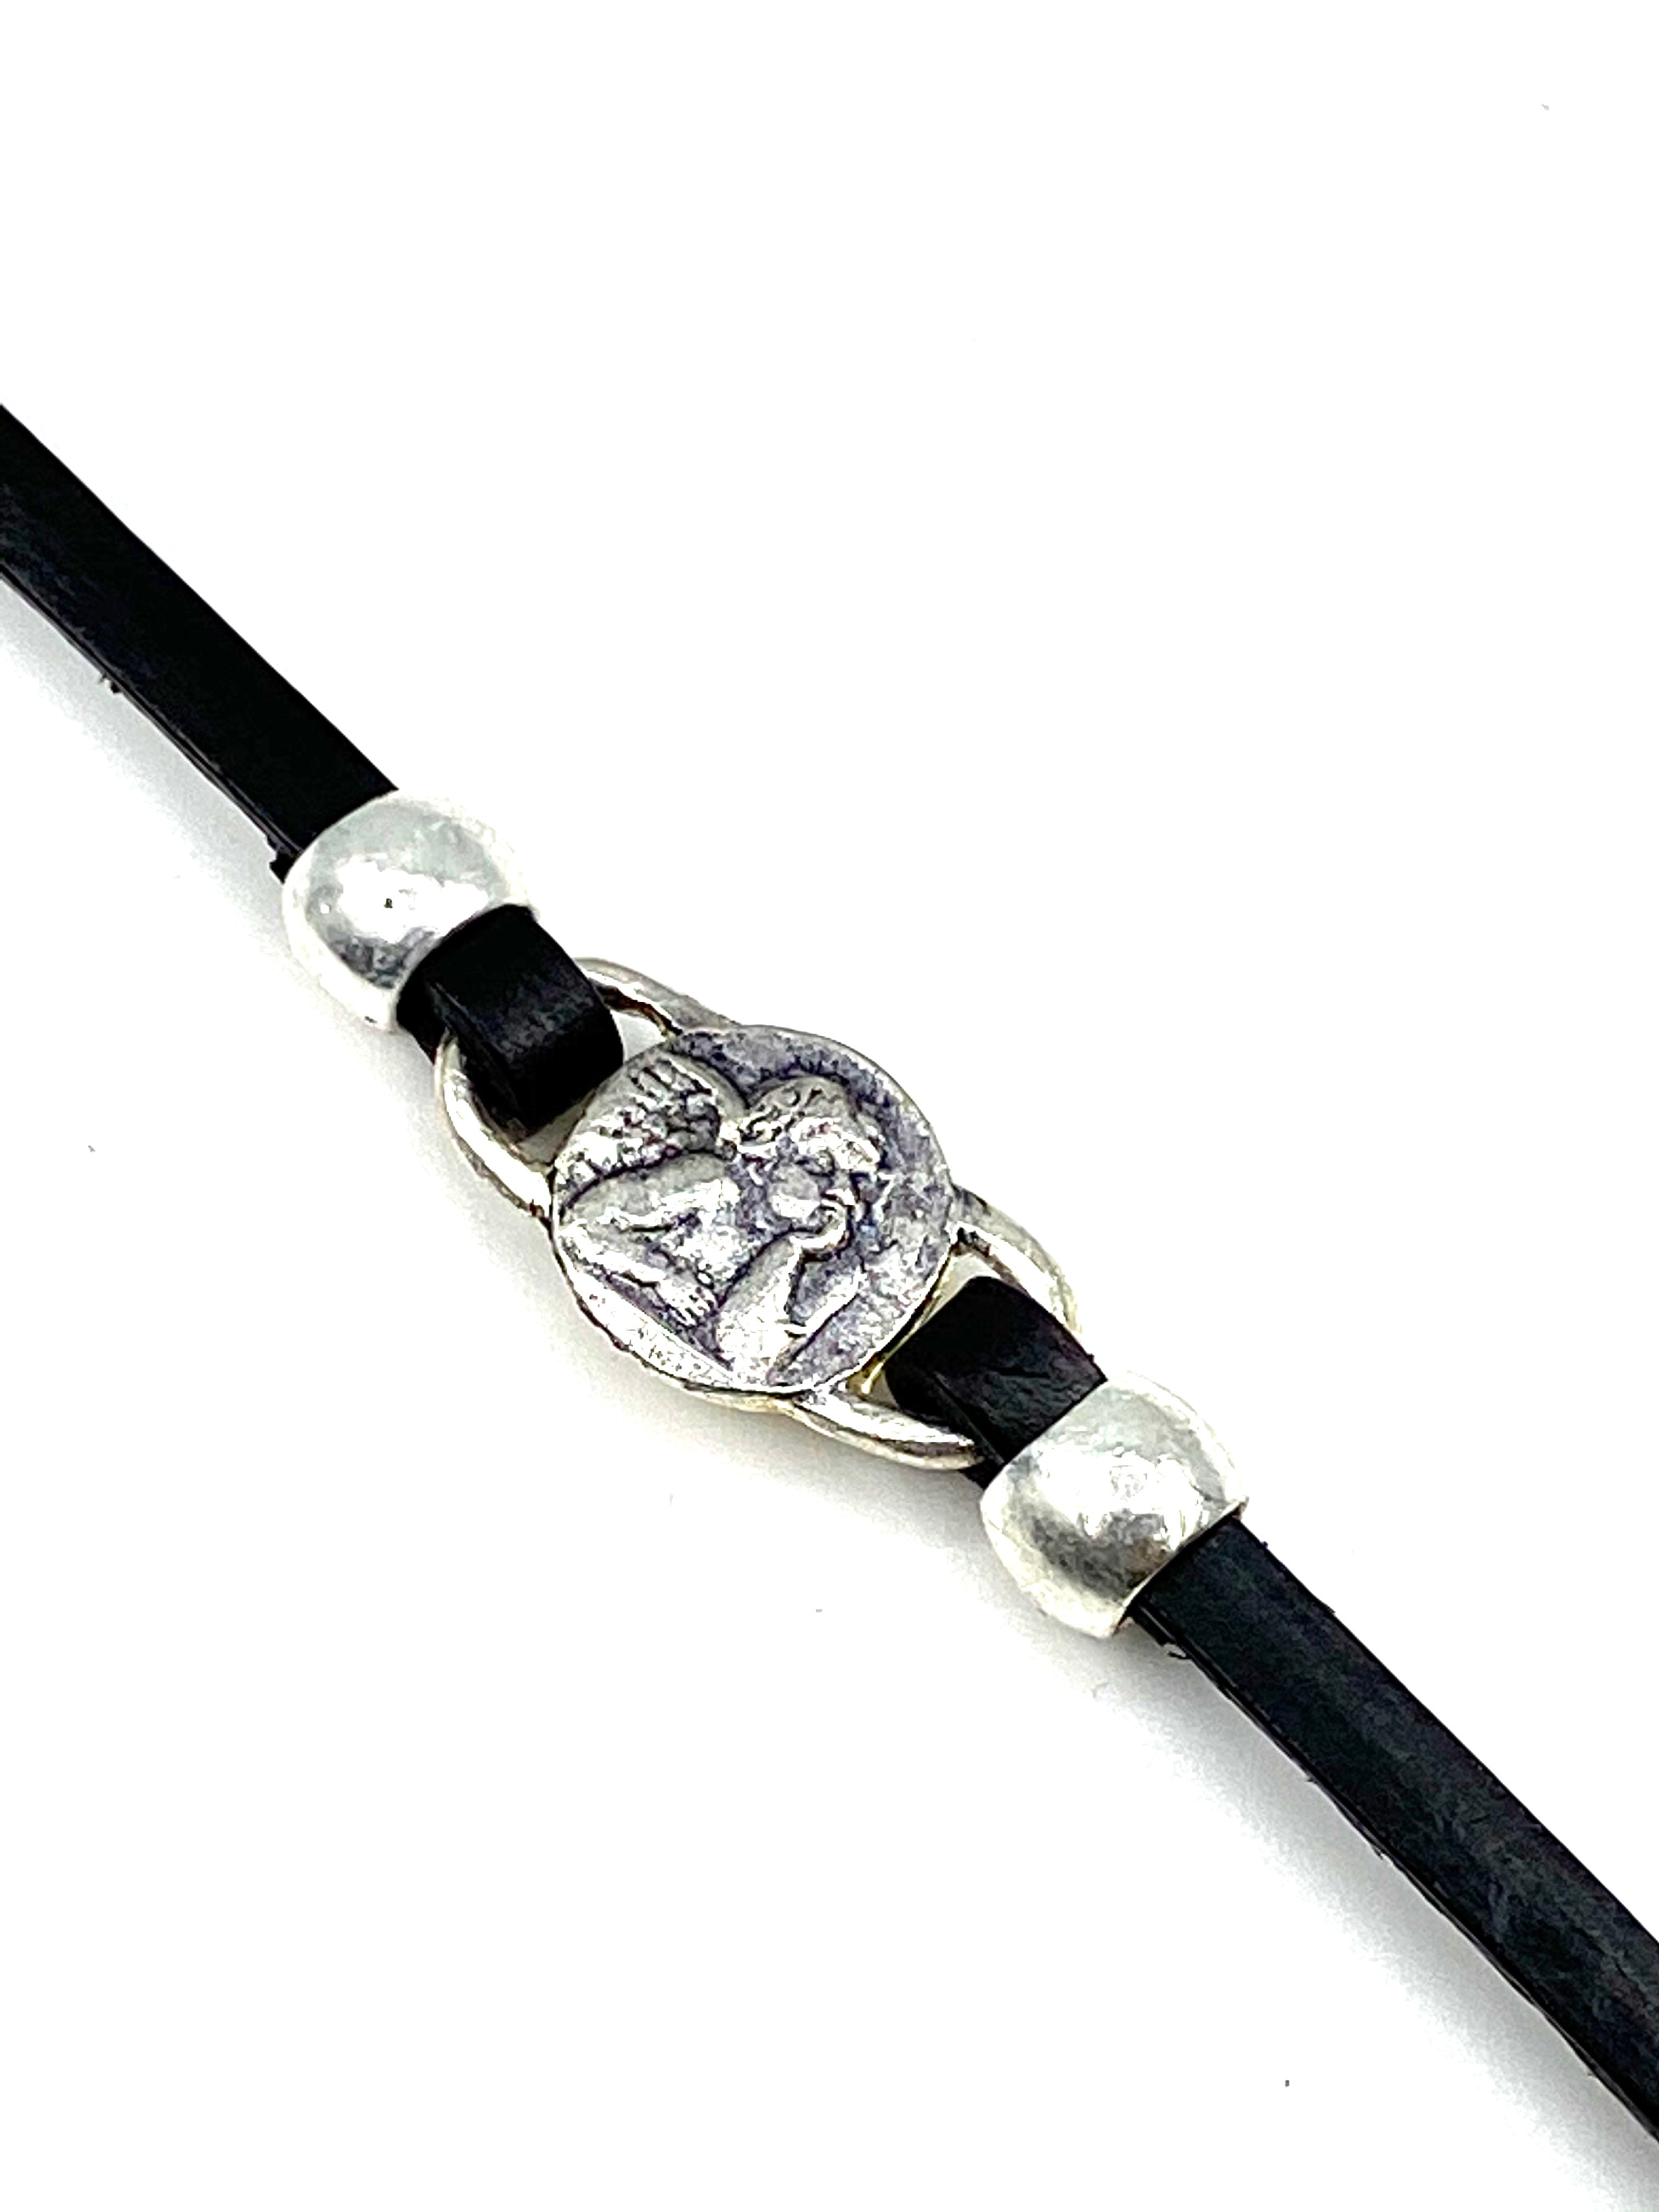 Bracelet of The Guardian Angel  handmade jewelry with Leather Straps by Graciela's Collection